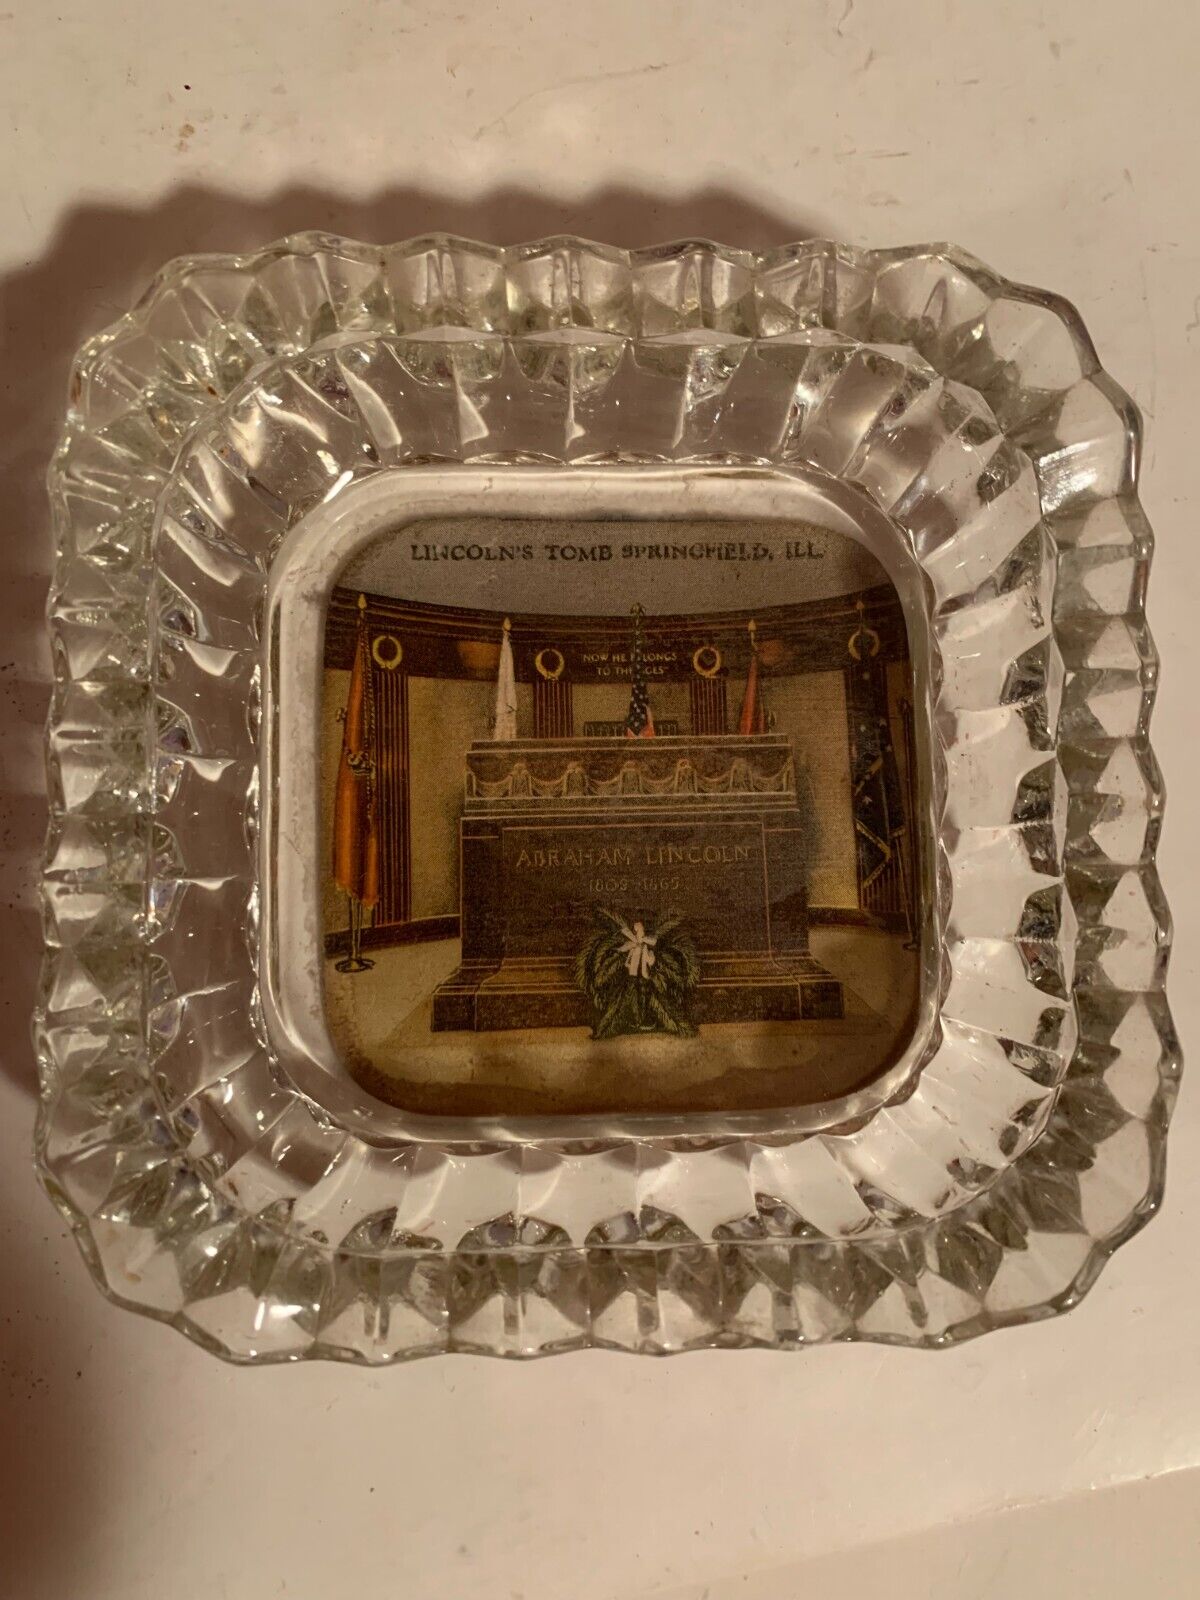 VINTAGE LINCOLN'S TOMB CRYSTAL ASHTRAY PRESIDENT ABRAHAM LINCOLN SPRINGFIELD ILL